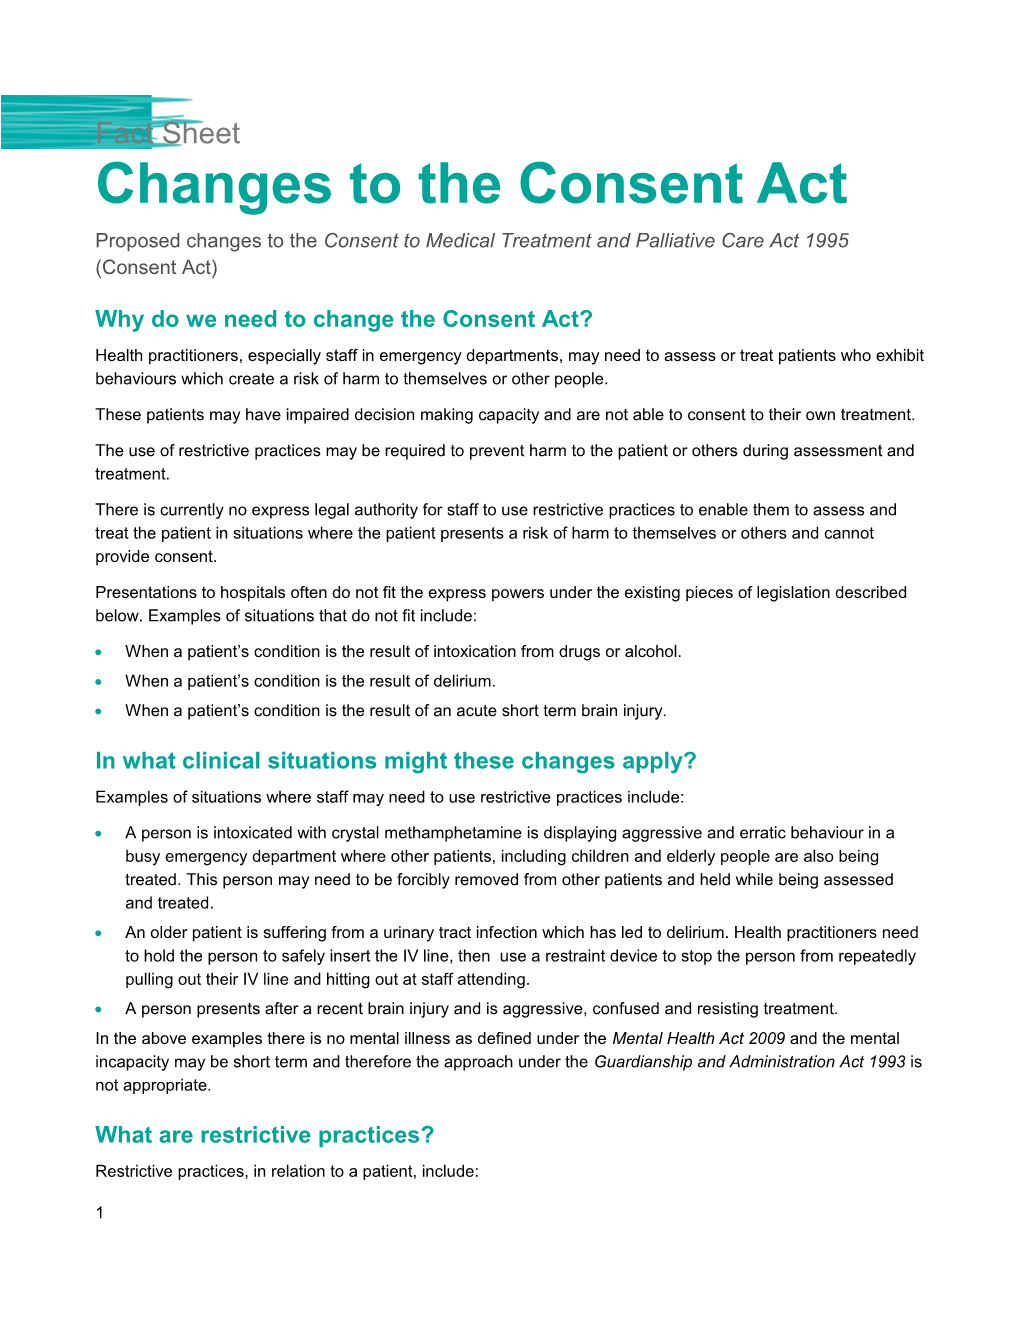 Why Do We Need to Change the Consent Act?